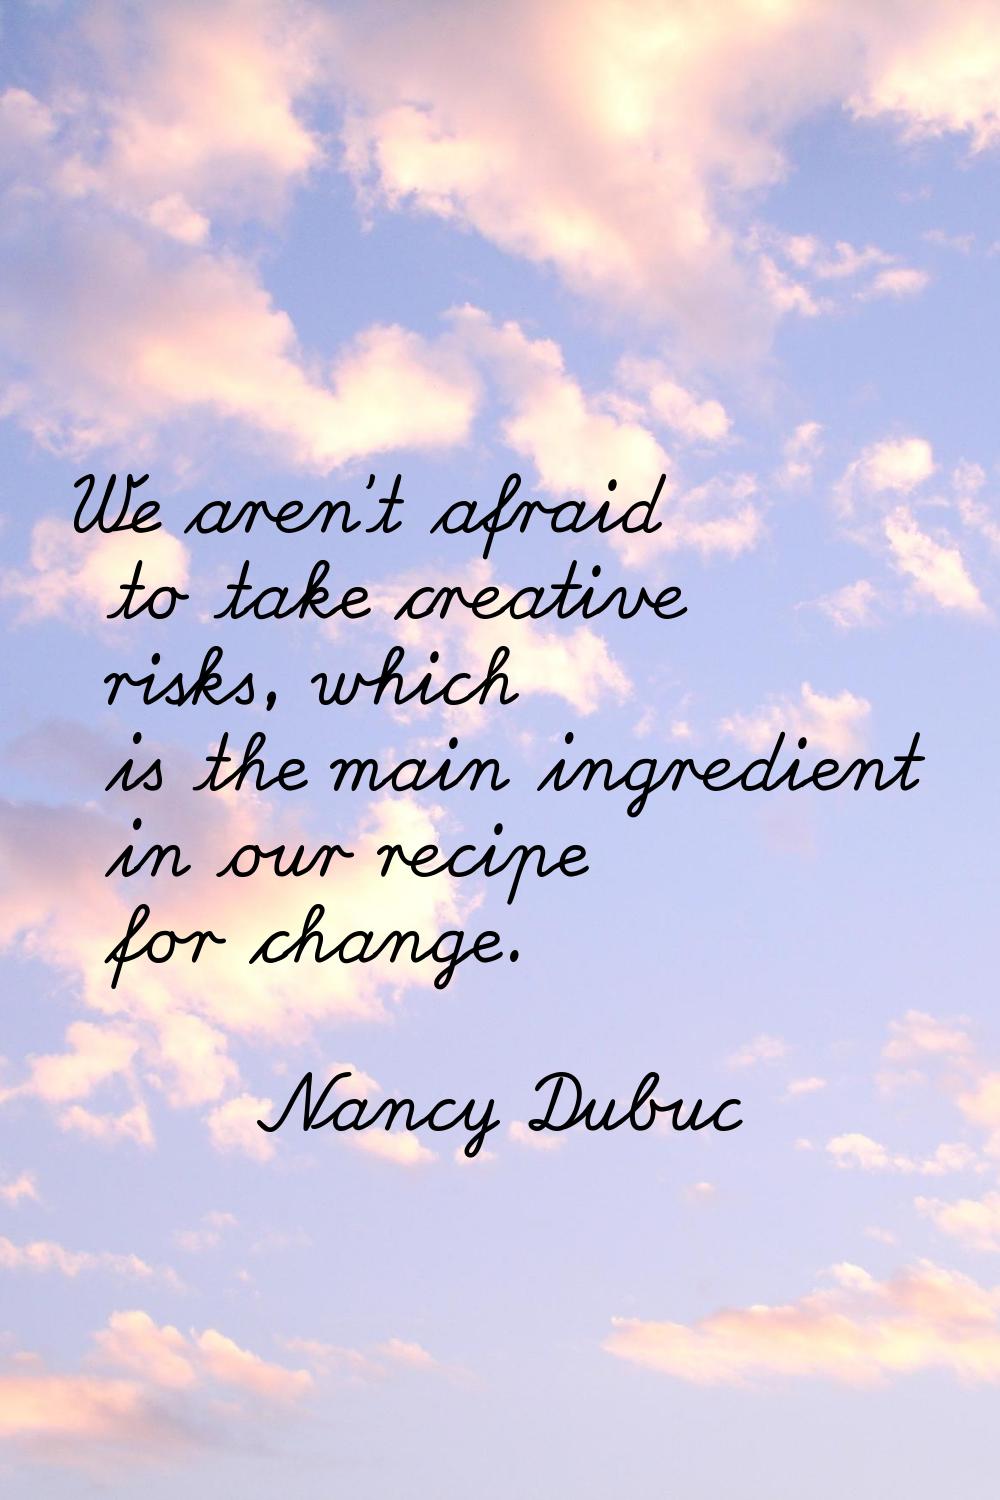 We aren't afraid to take creative risks, which is the main ingredient in our recipe for change.